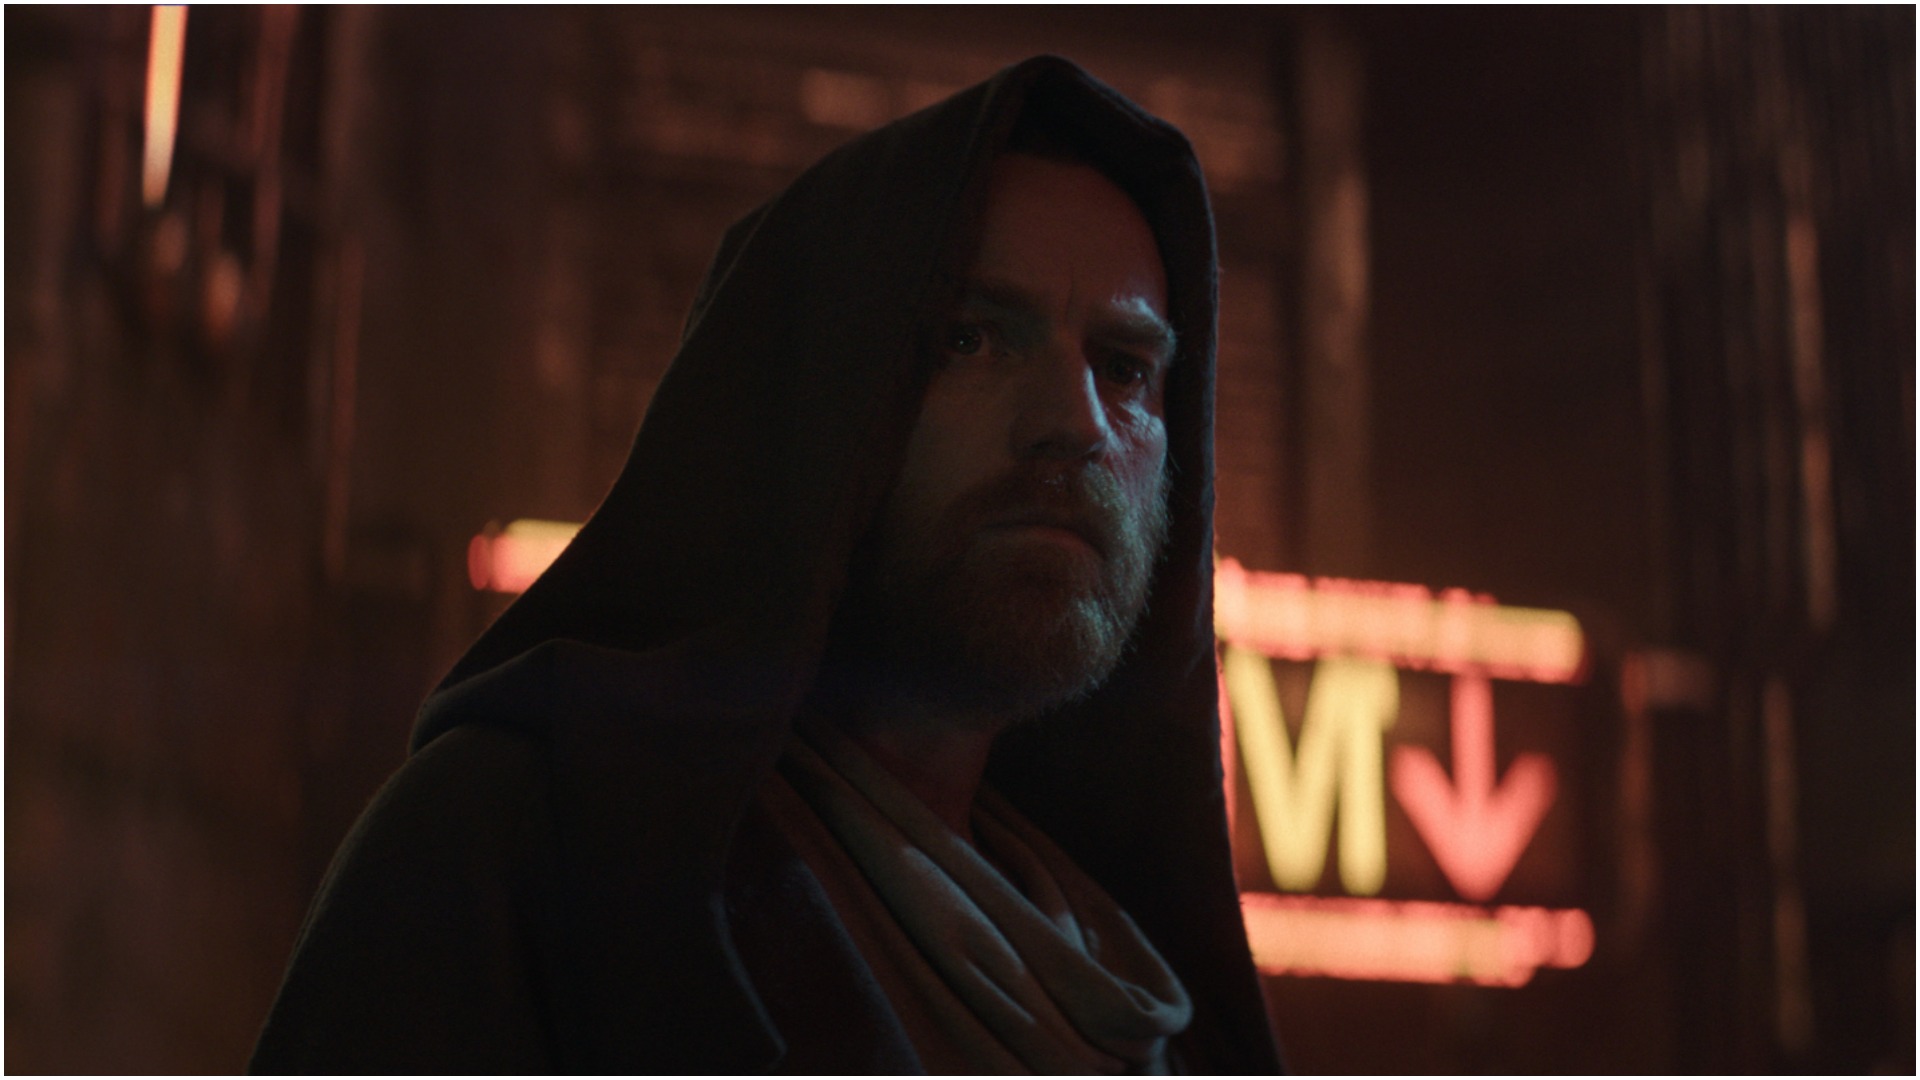 Obi-Wan Kenobi has already changed the meaning of a key Star Wars: A New Hope line